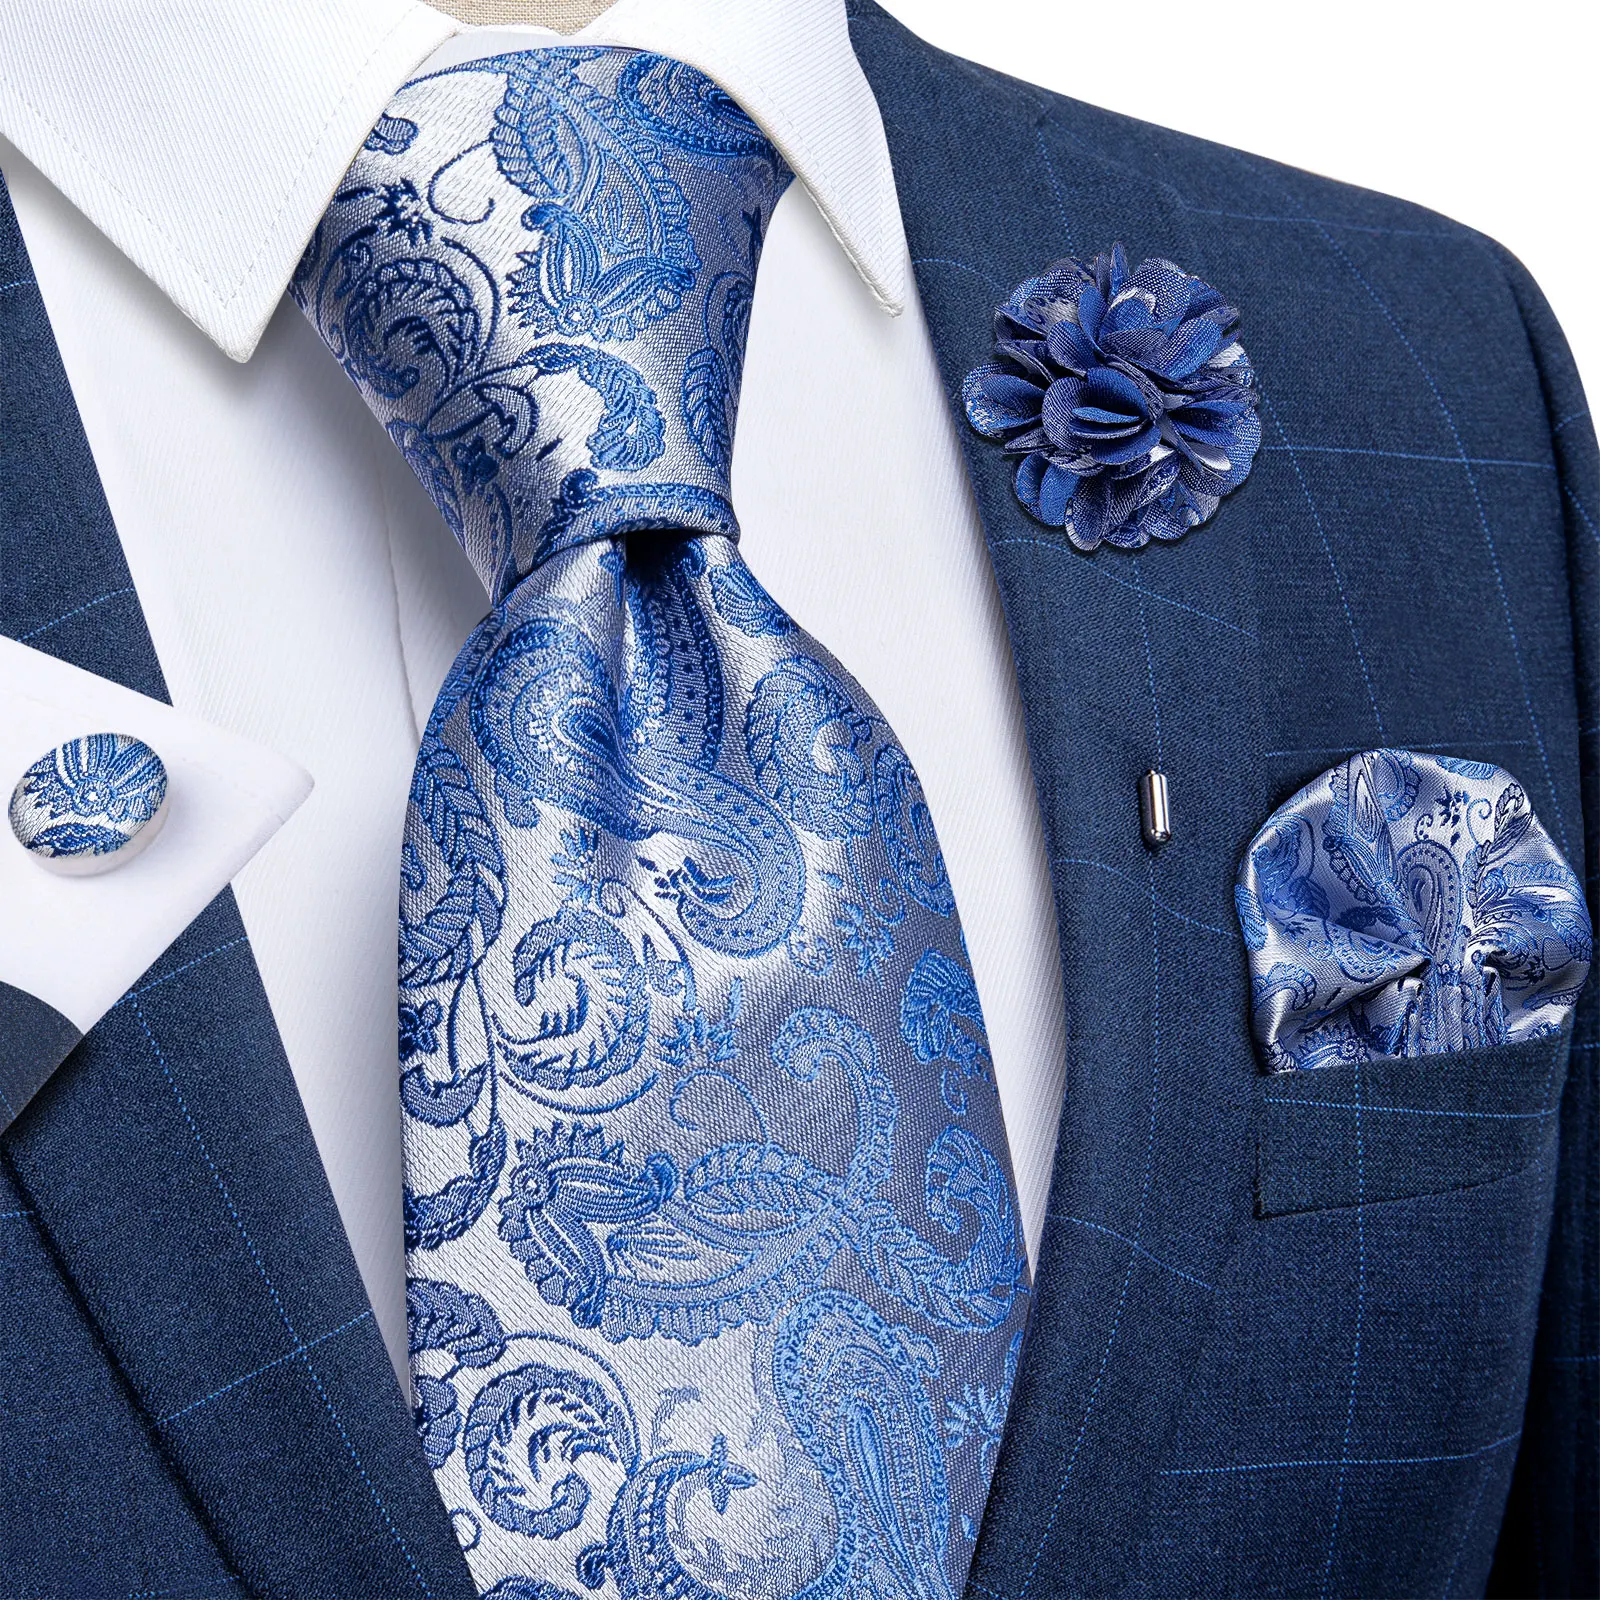 Blue Silver Paisley Neck Ties For Men Luxury 8cm Wide Silk Wed Tie Pocket Square Cufflinks Set Brooch Christmas Gifts For Men